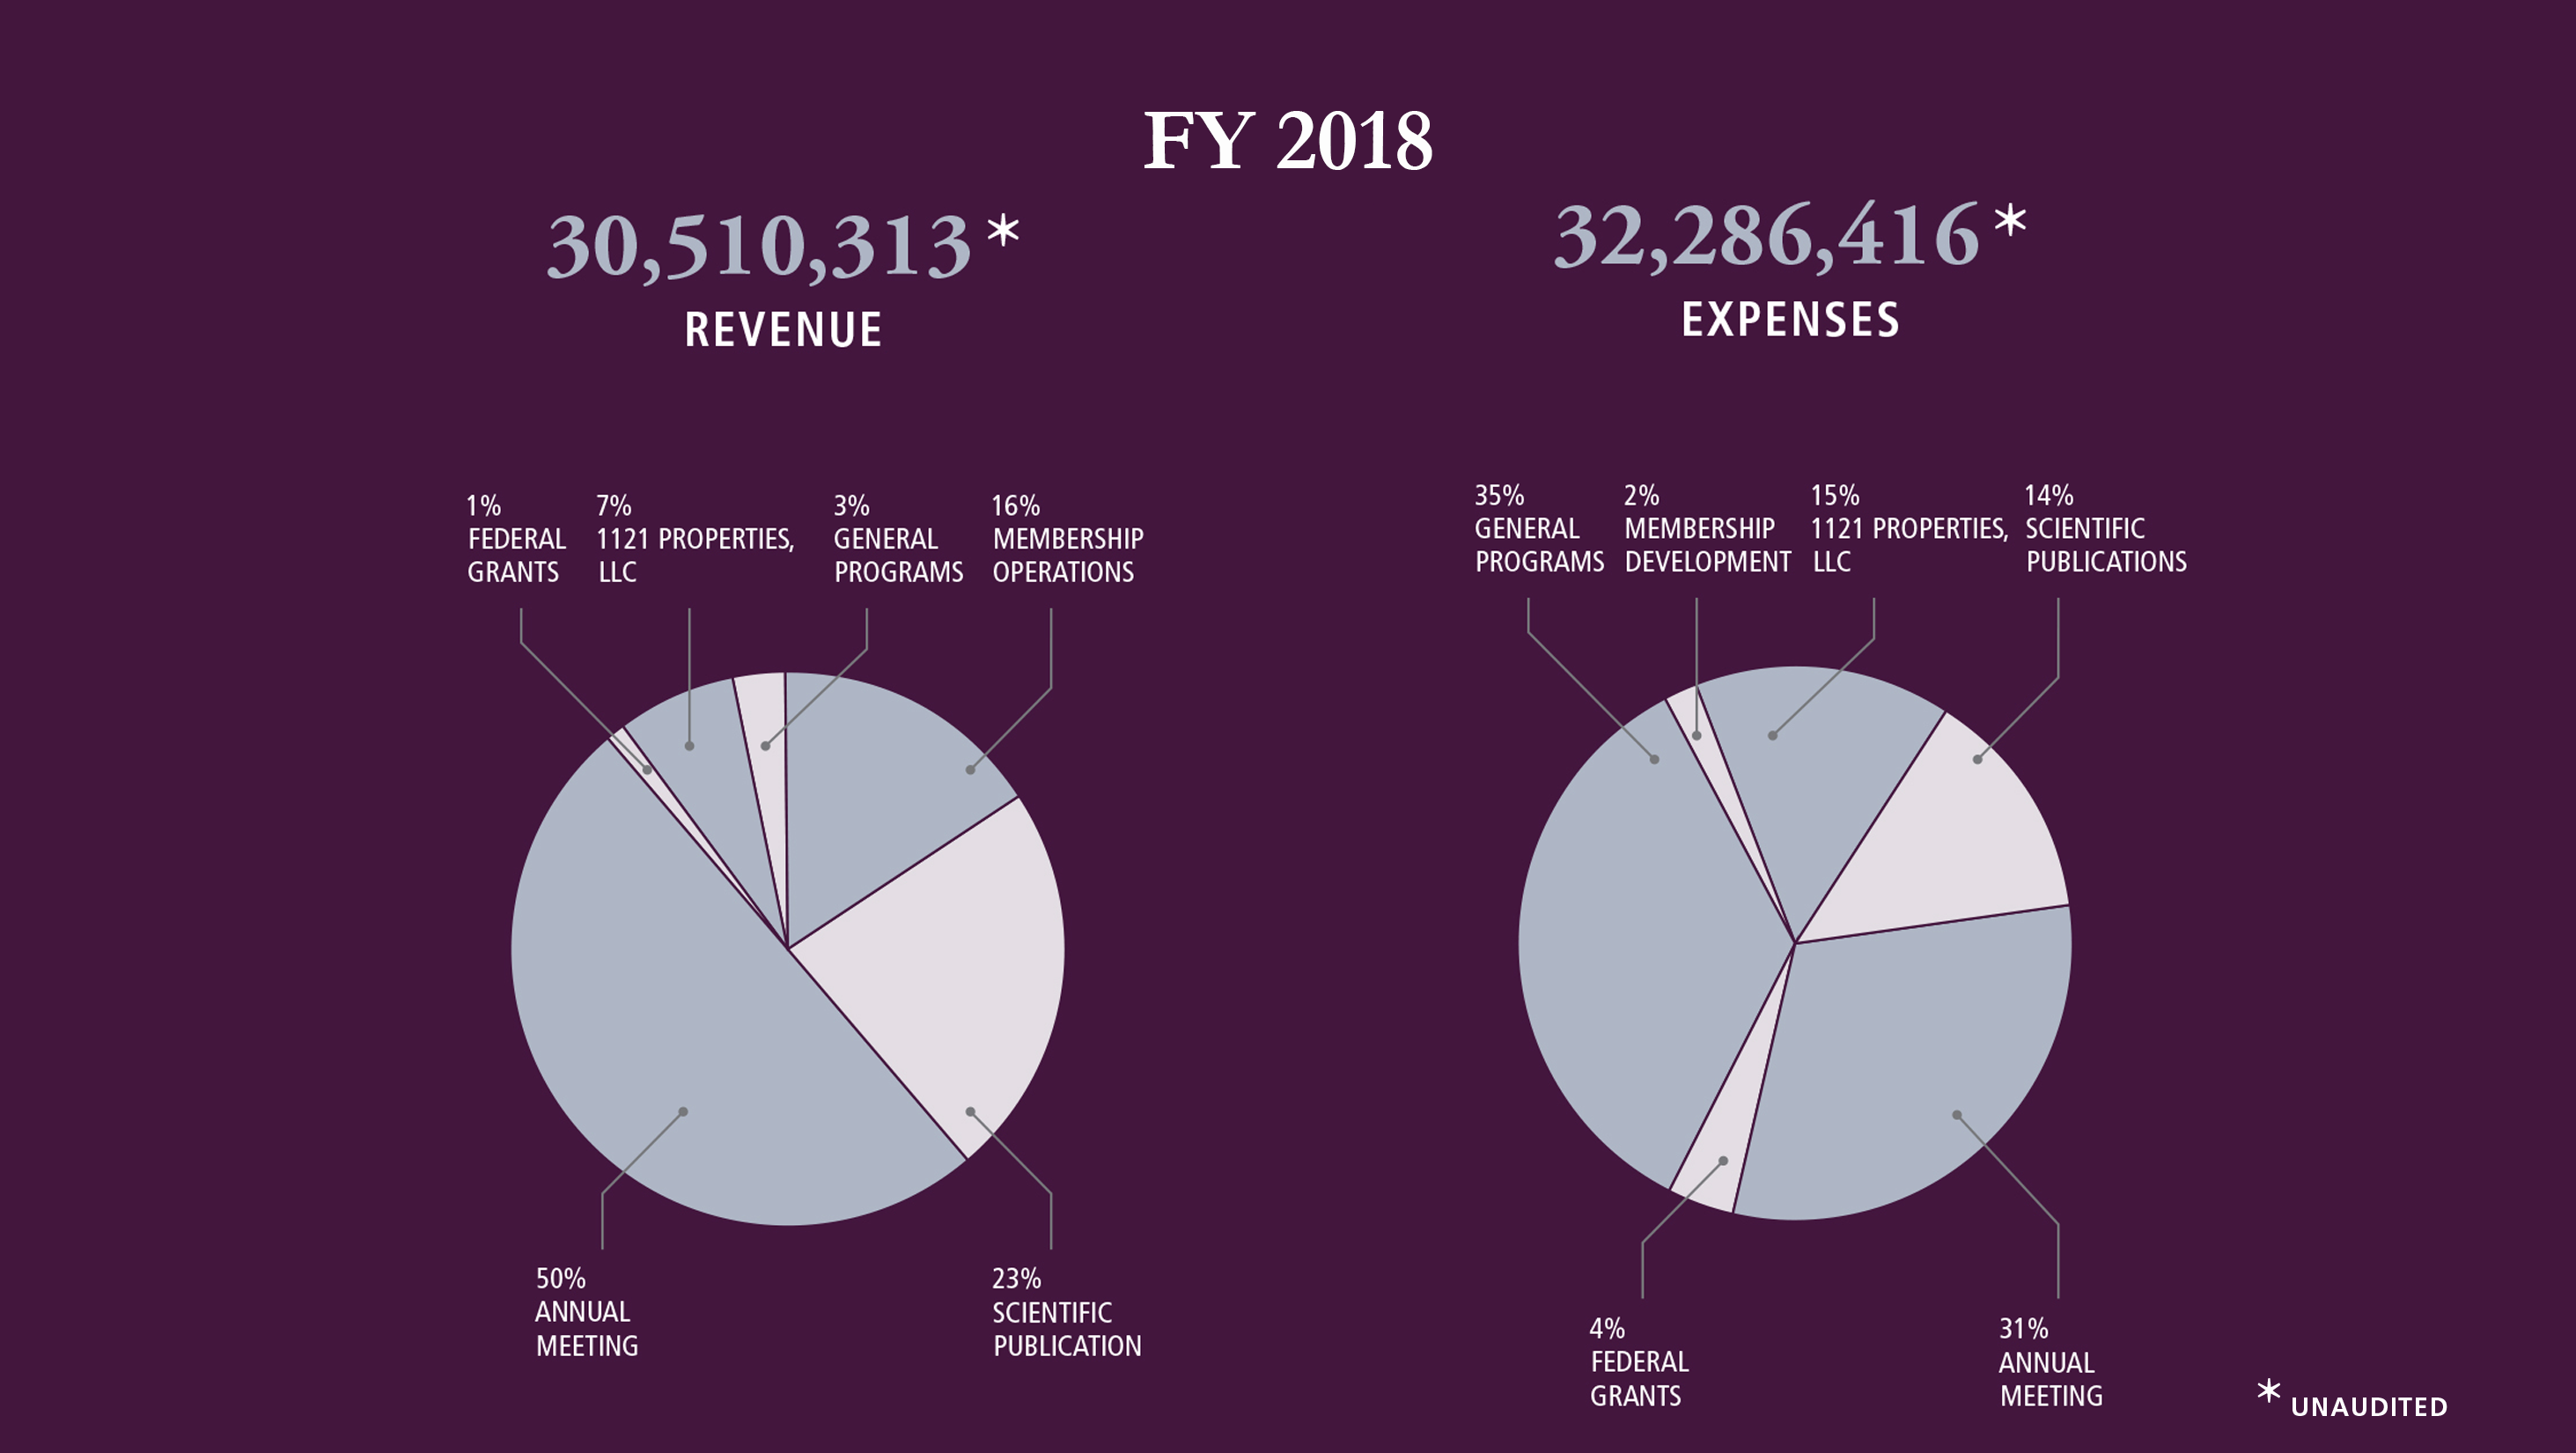 Financial Overview FY 2018